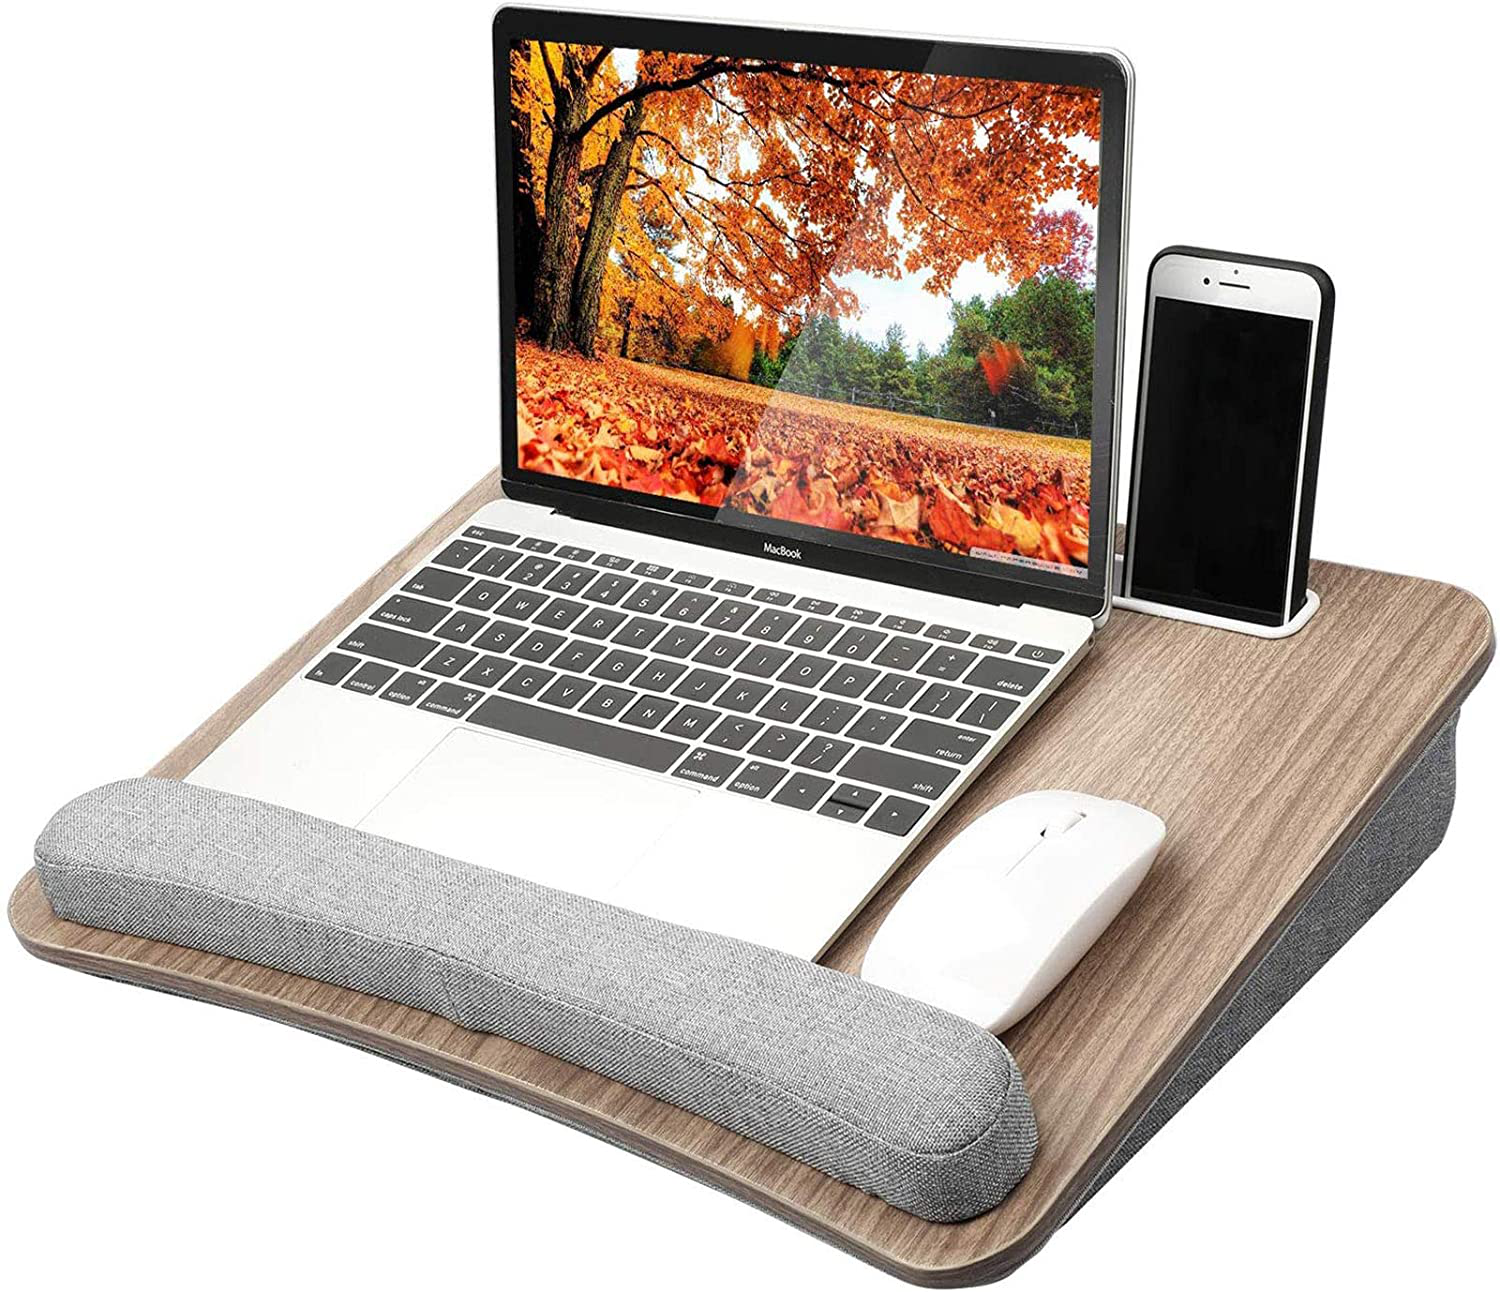 HUANUO Lap Laptop Desk - Portable Lap Desk with Pillow Cushion, Fits up to 15.6 inch Laptop, with Anti-Slip Strip & Storage Function for Home Office Students Use as Computer Laptop Stand, Book Tablet